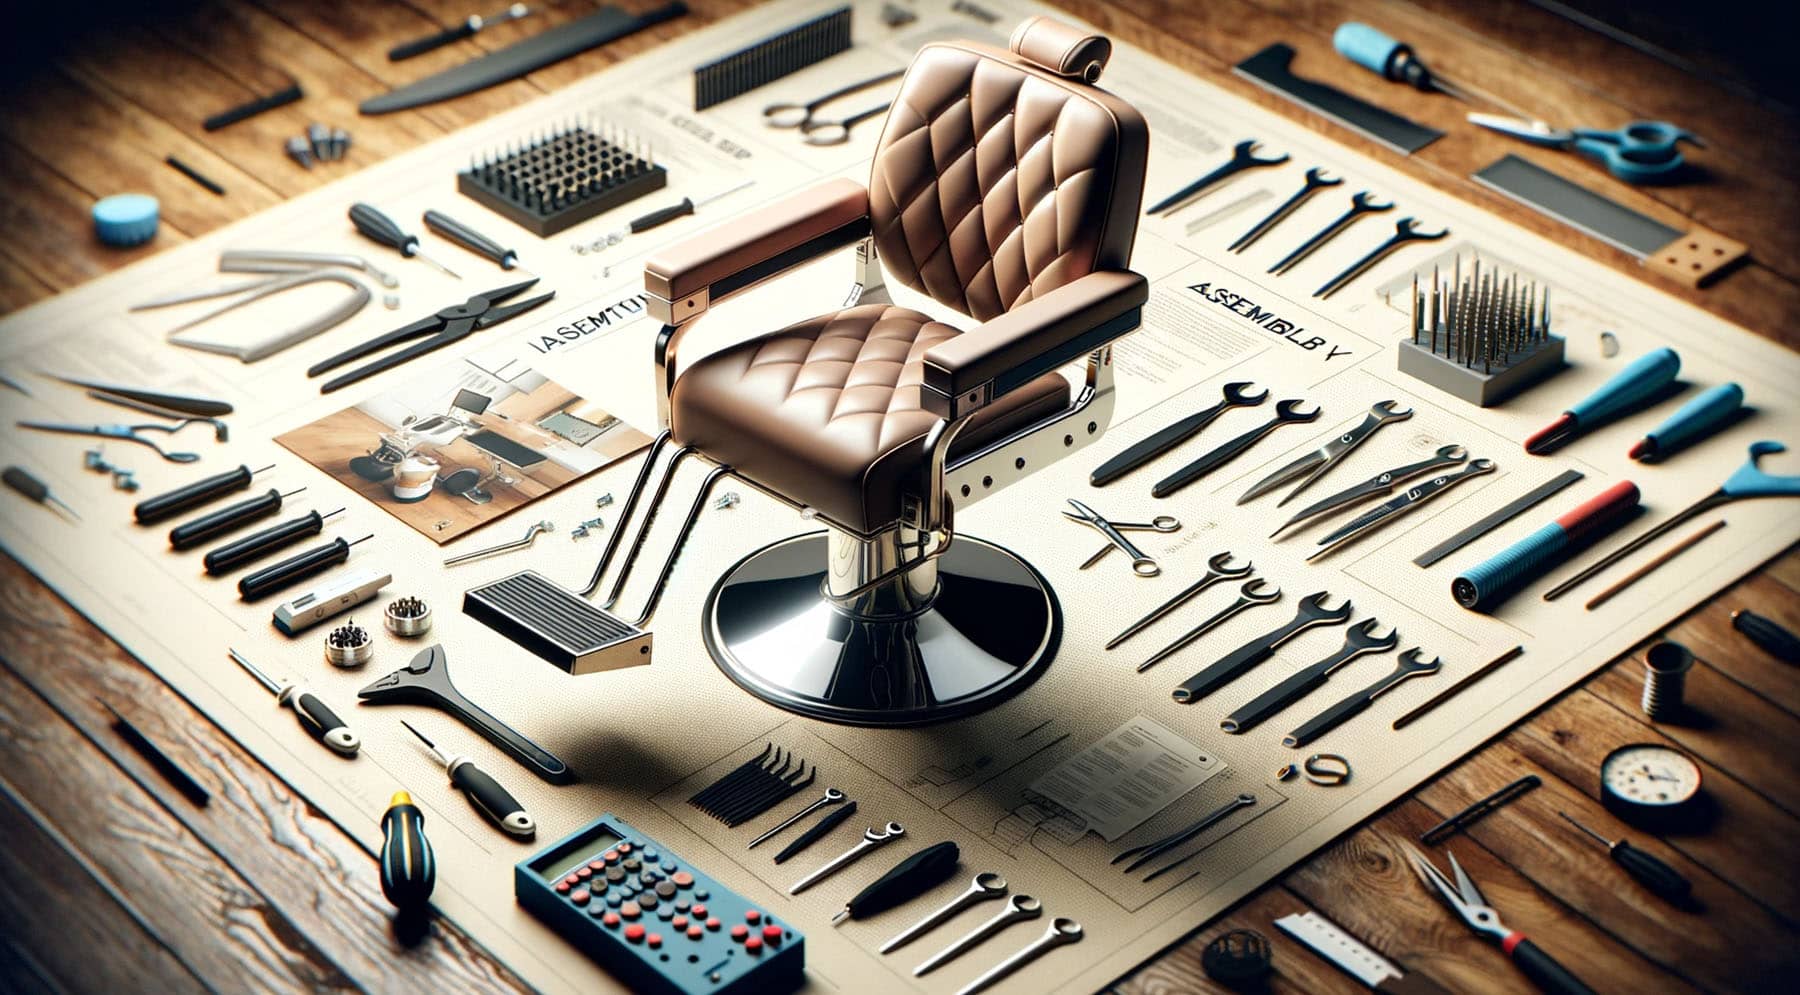 Modern barber chair assembly with tools and manual on wooden workspace, symbolizing DIY setup for professionals.